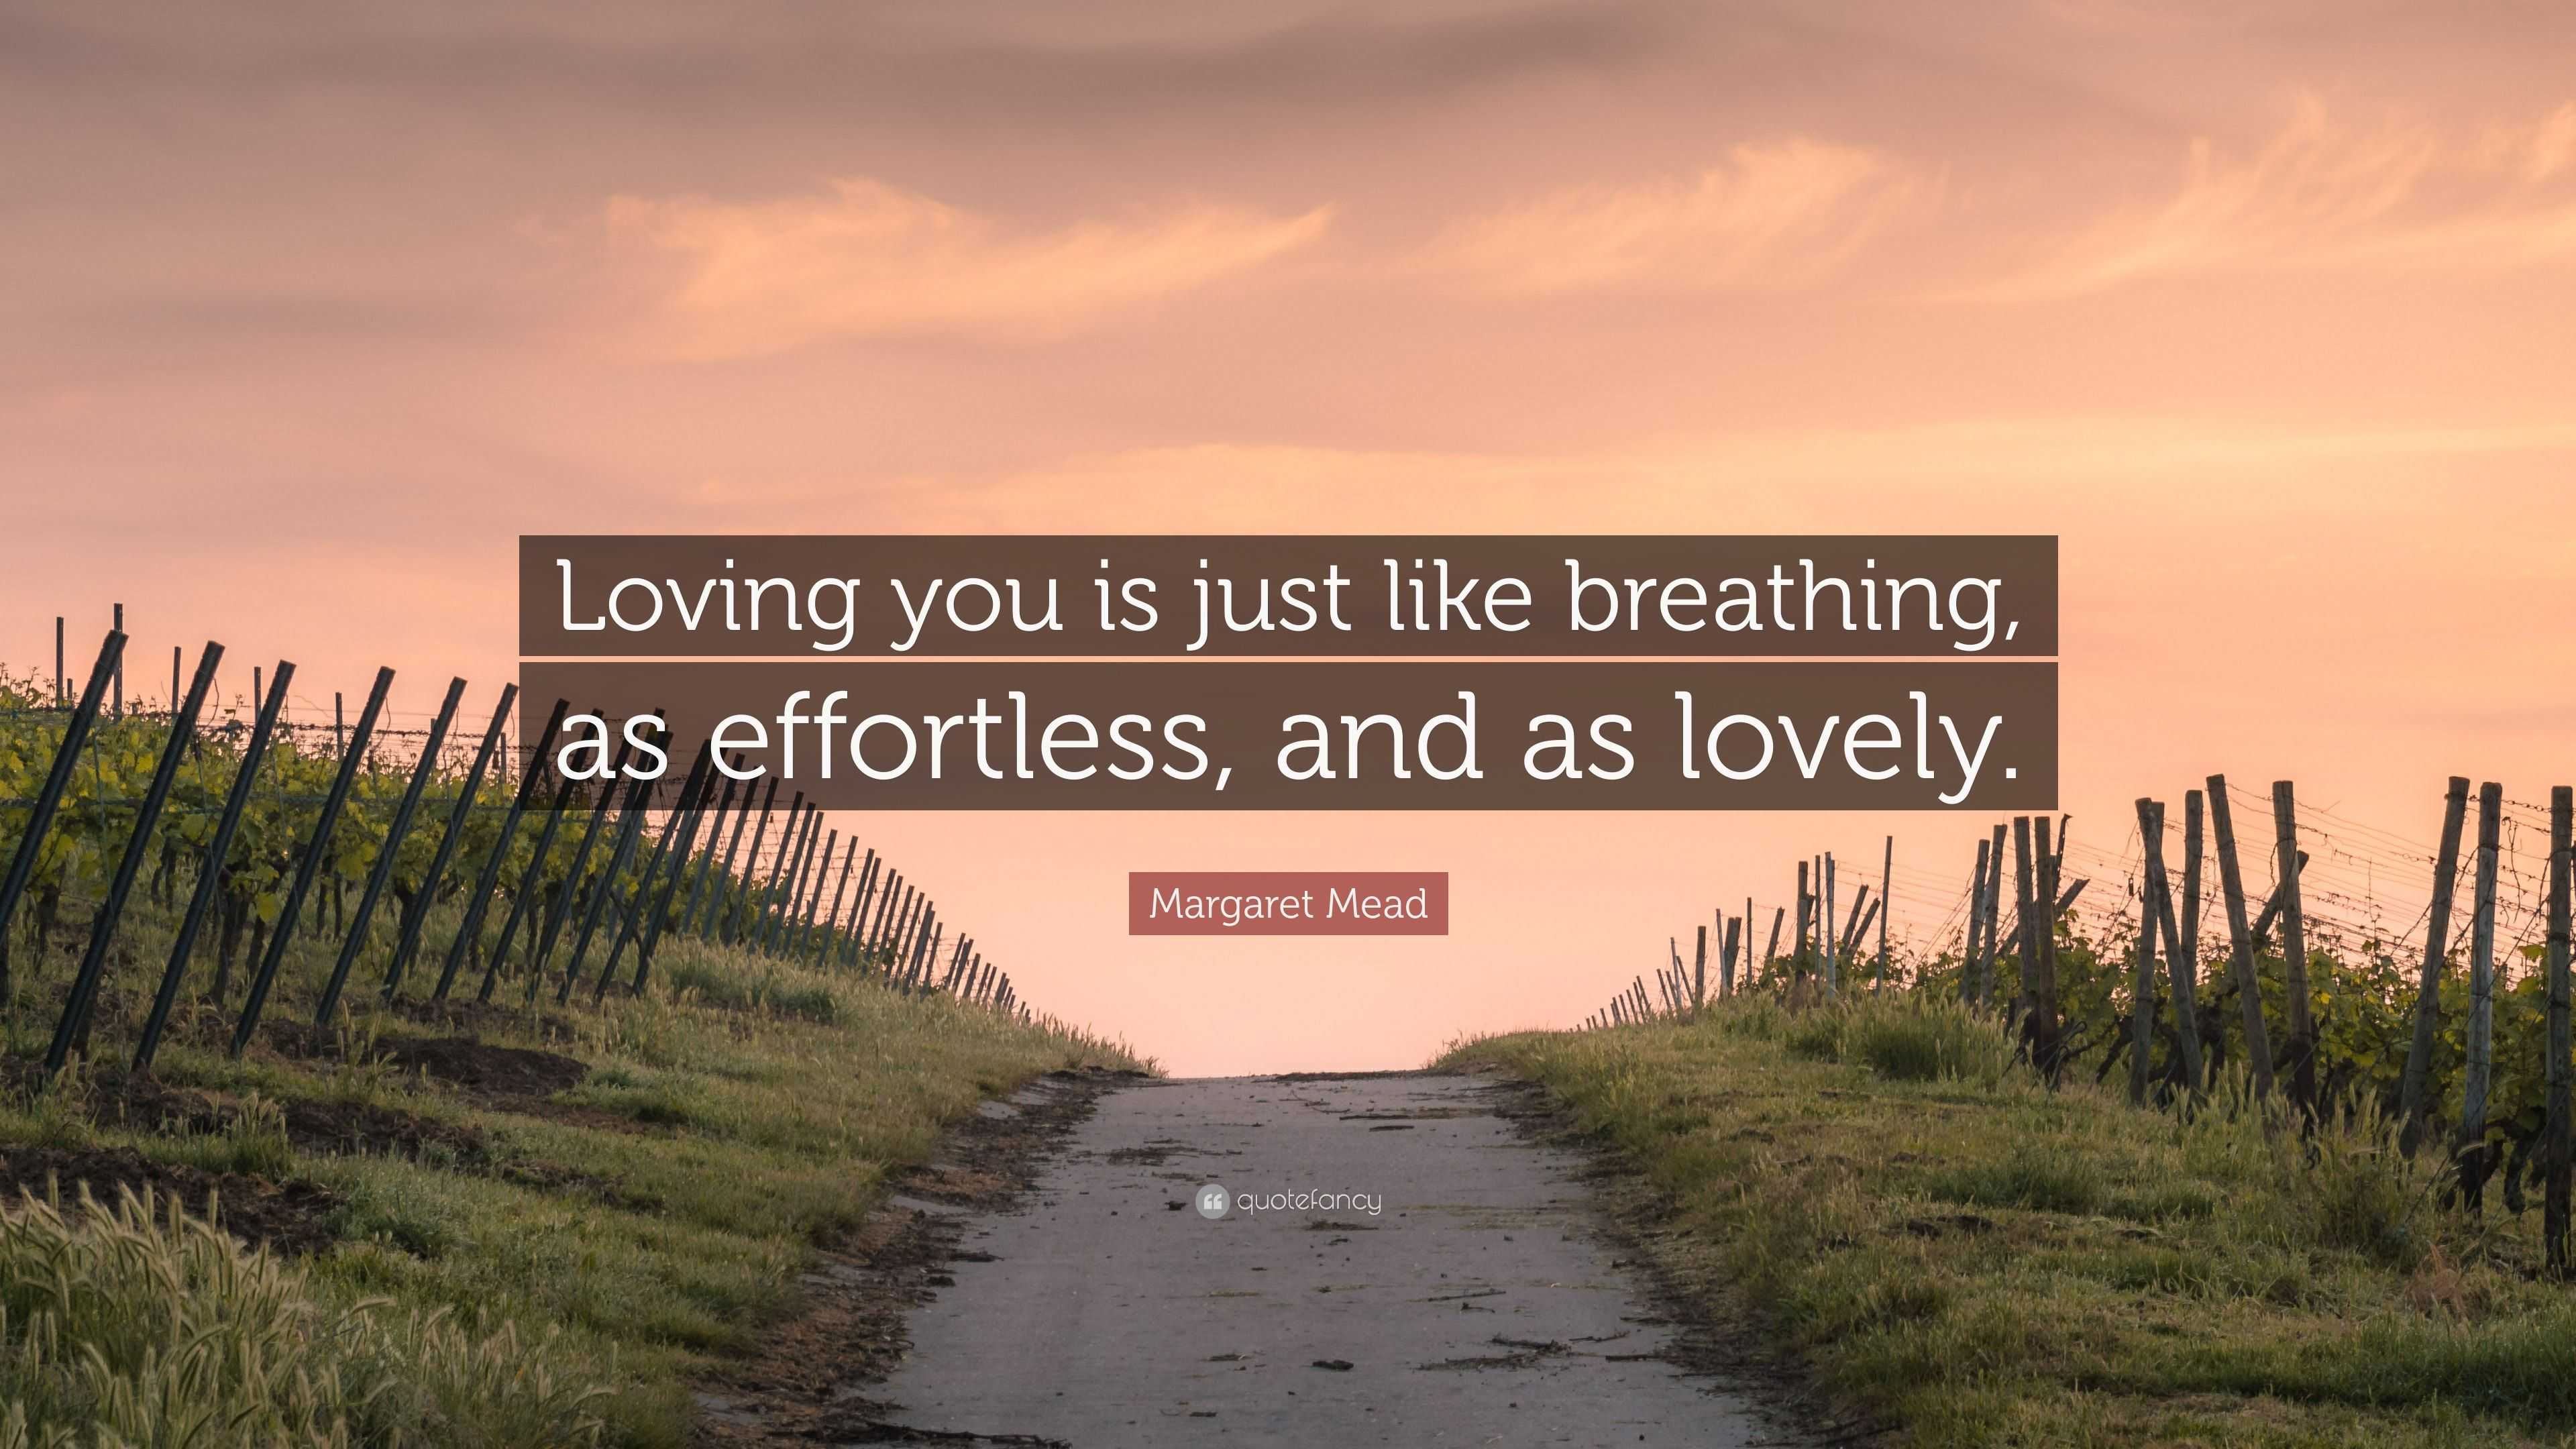 Margaret Mead Quote “Loving you is just like breathing as effortless and